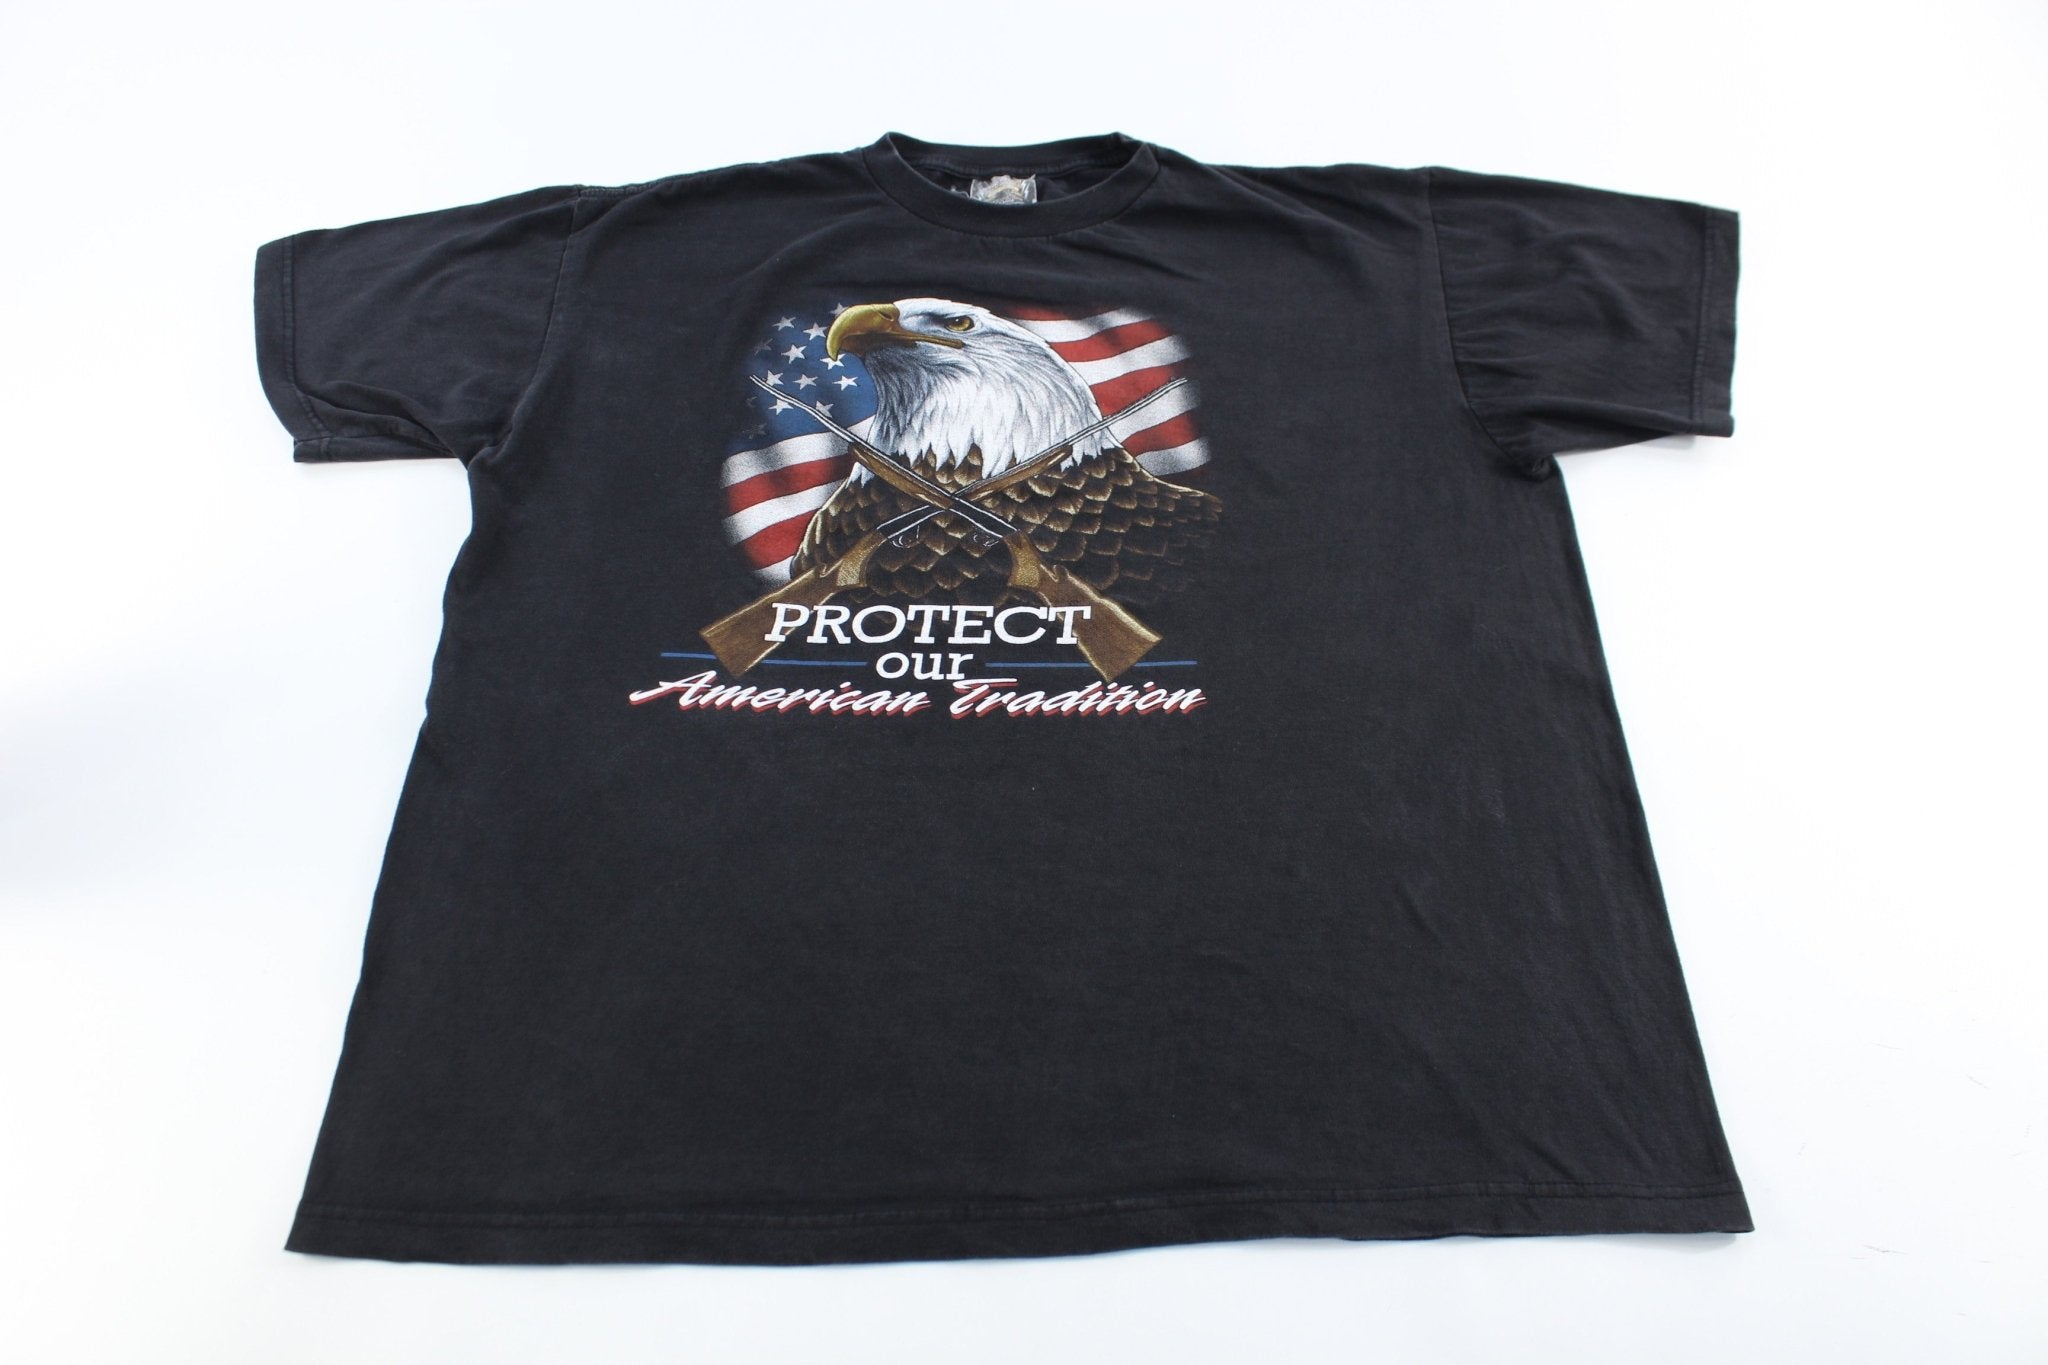 2002 Sturgis Protect Our American Tradition T-Shirt - ThriftedThreads.com